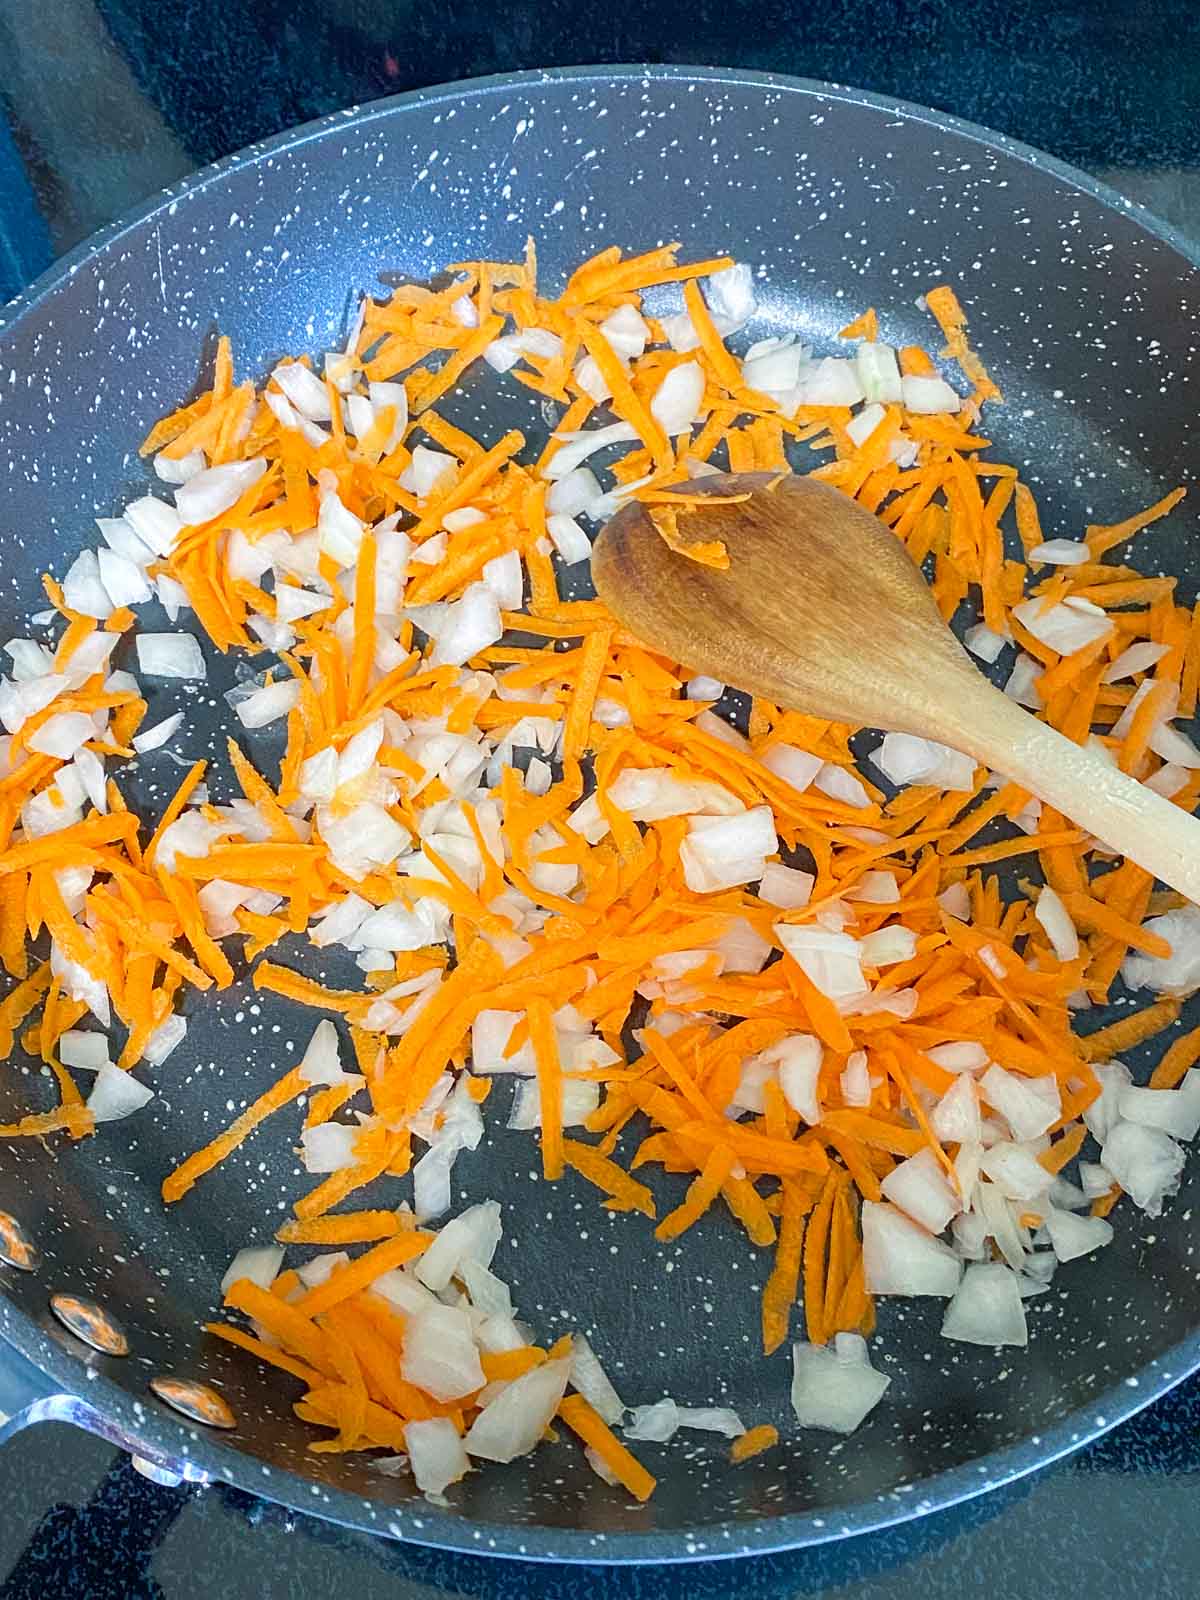 Diced onions and grated carrots in a non-stick skillet.